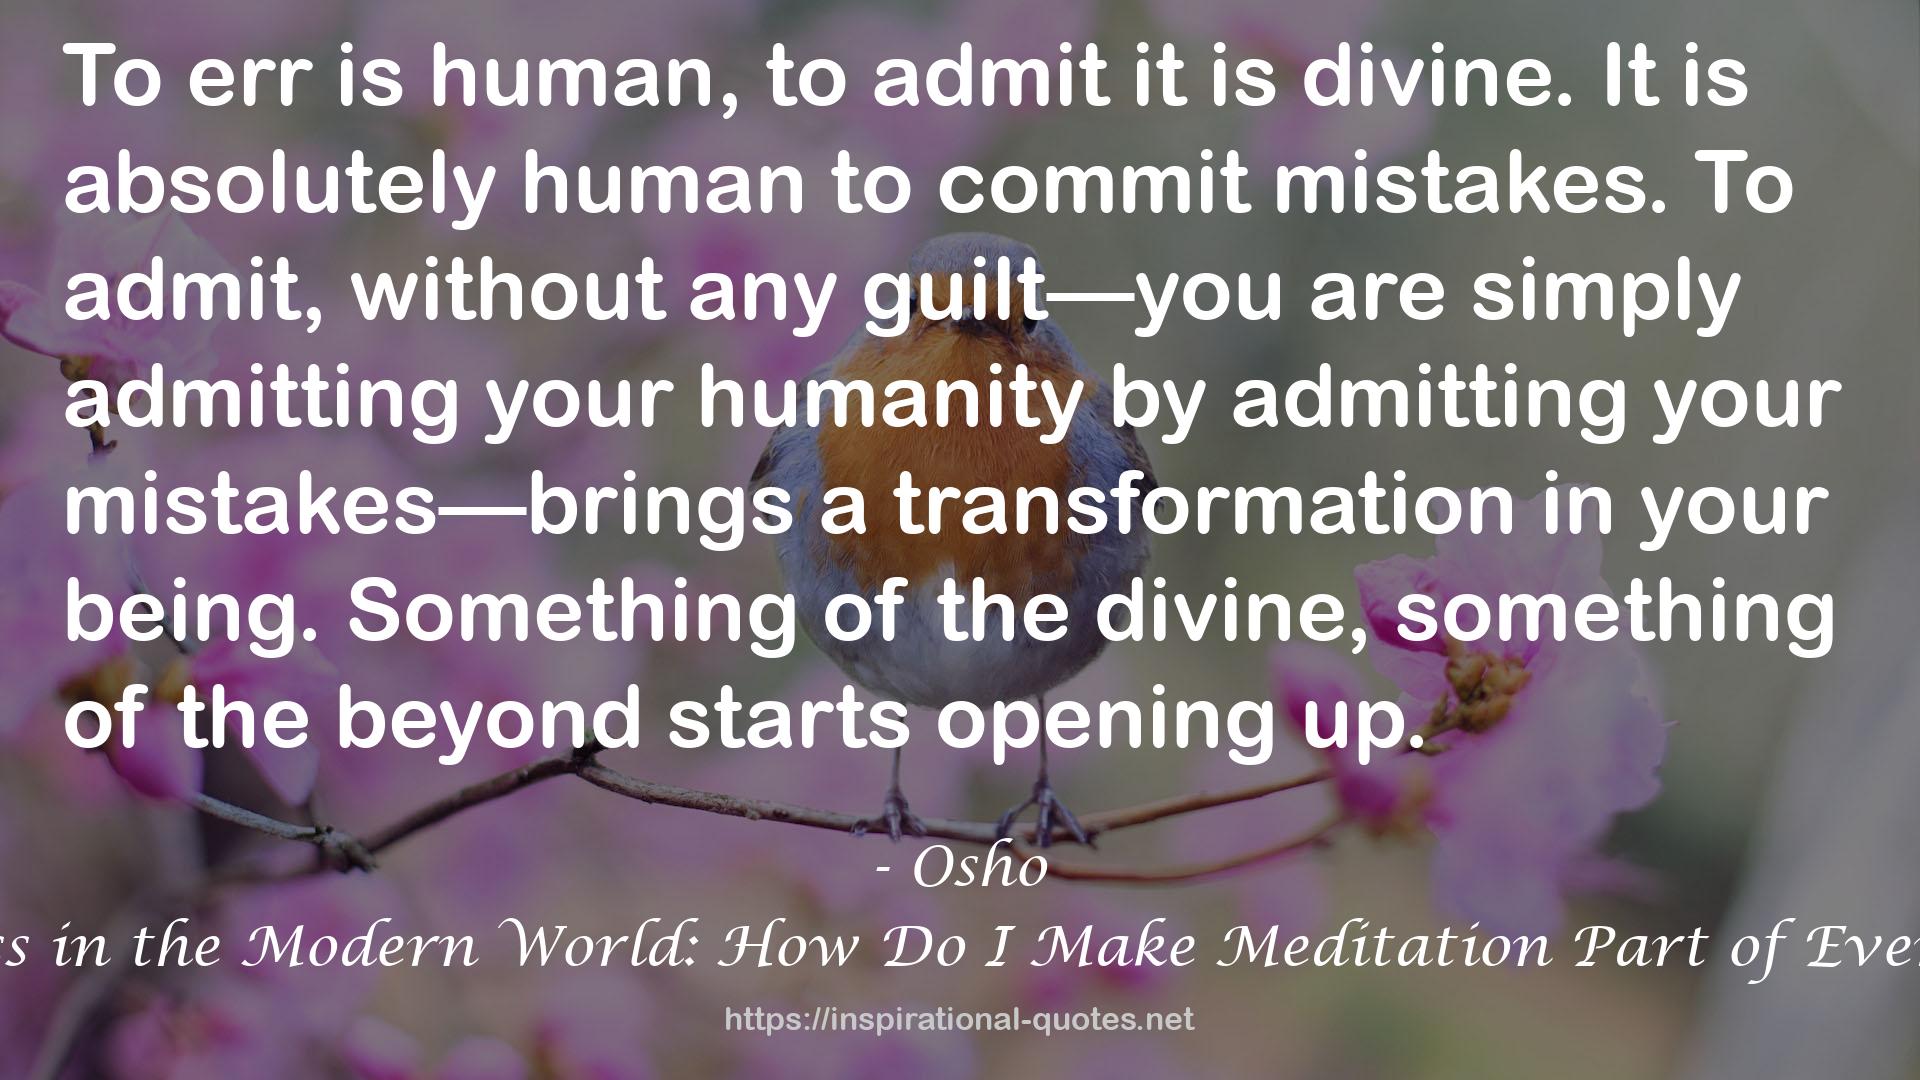 Mindfulness in the Modern World: How Do I Make Meditation Part of Everyday Life? QUOTES